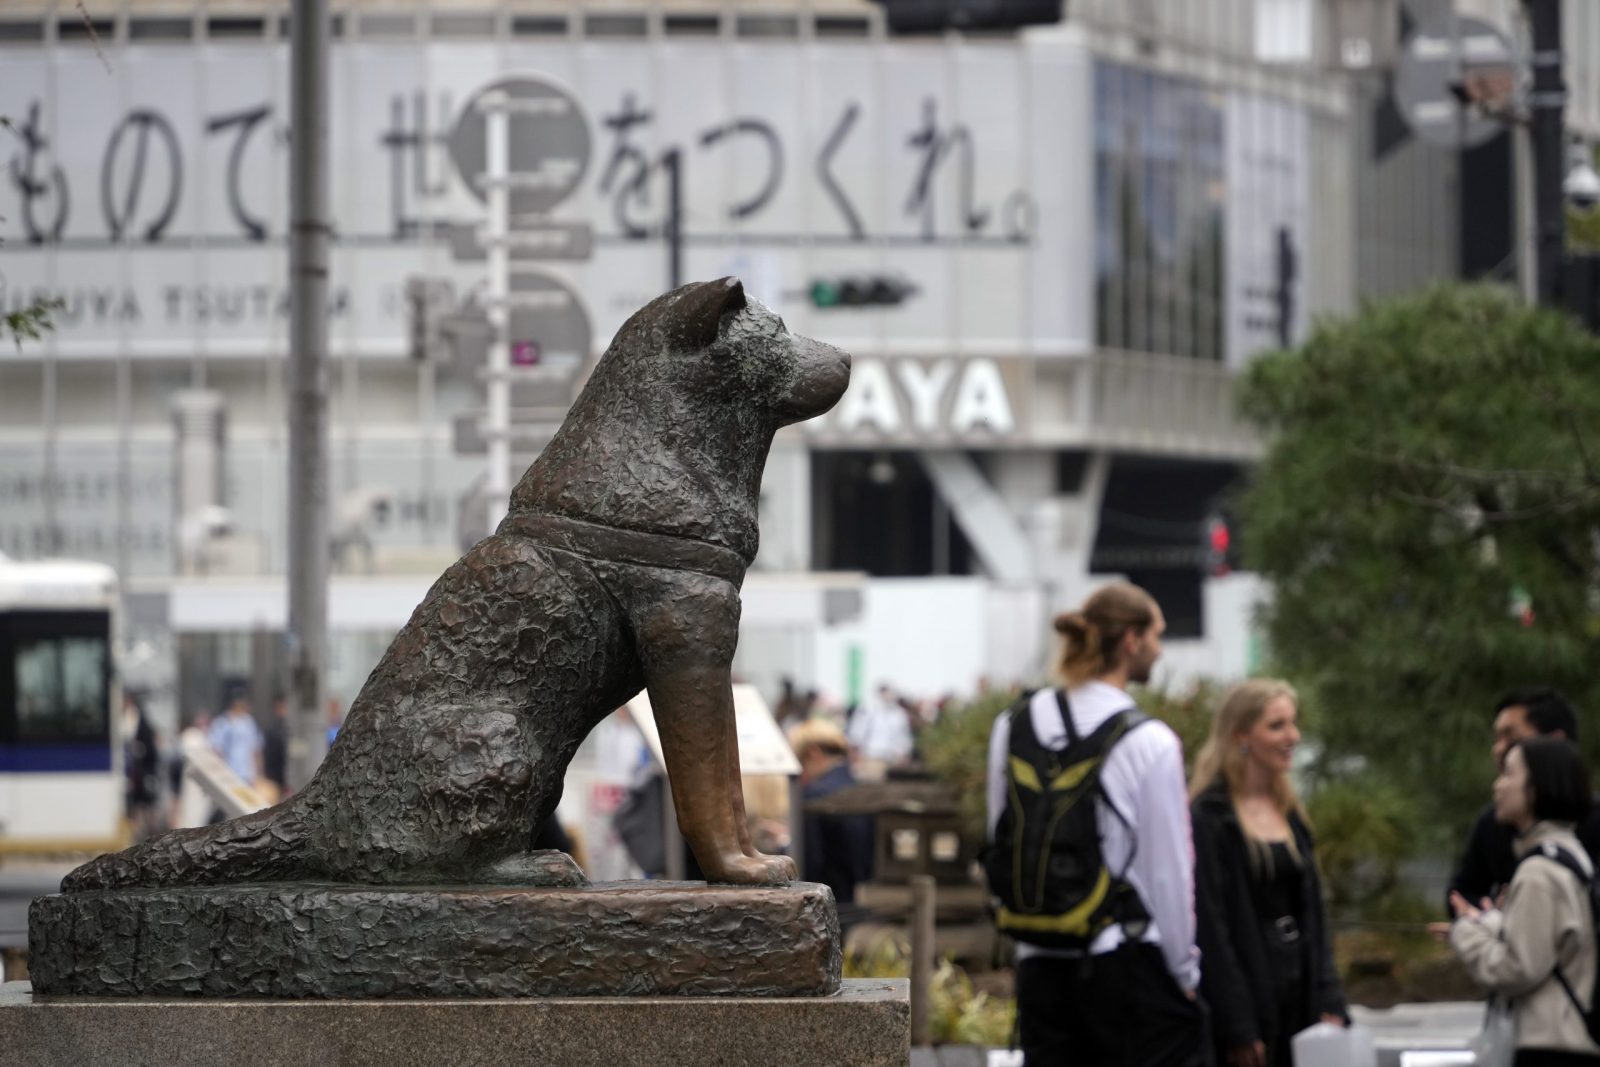 epa10967966 The statue of Hachiko stands outside Shibuya station in Tokyo, Japan, 10 November 2023. On 10 November 2023, Japan marks 100 years since the birth of the faithful dog Hachiko (1923-1935), known for continuing to wait in front of the Shibuya train station for his owner after his death, and whose statue is an icon of Tokyo and one of the most famous monuments visited from the city.  EPA/FRANCK ROBICHON